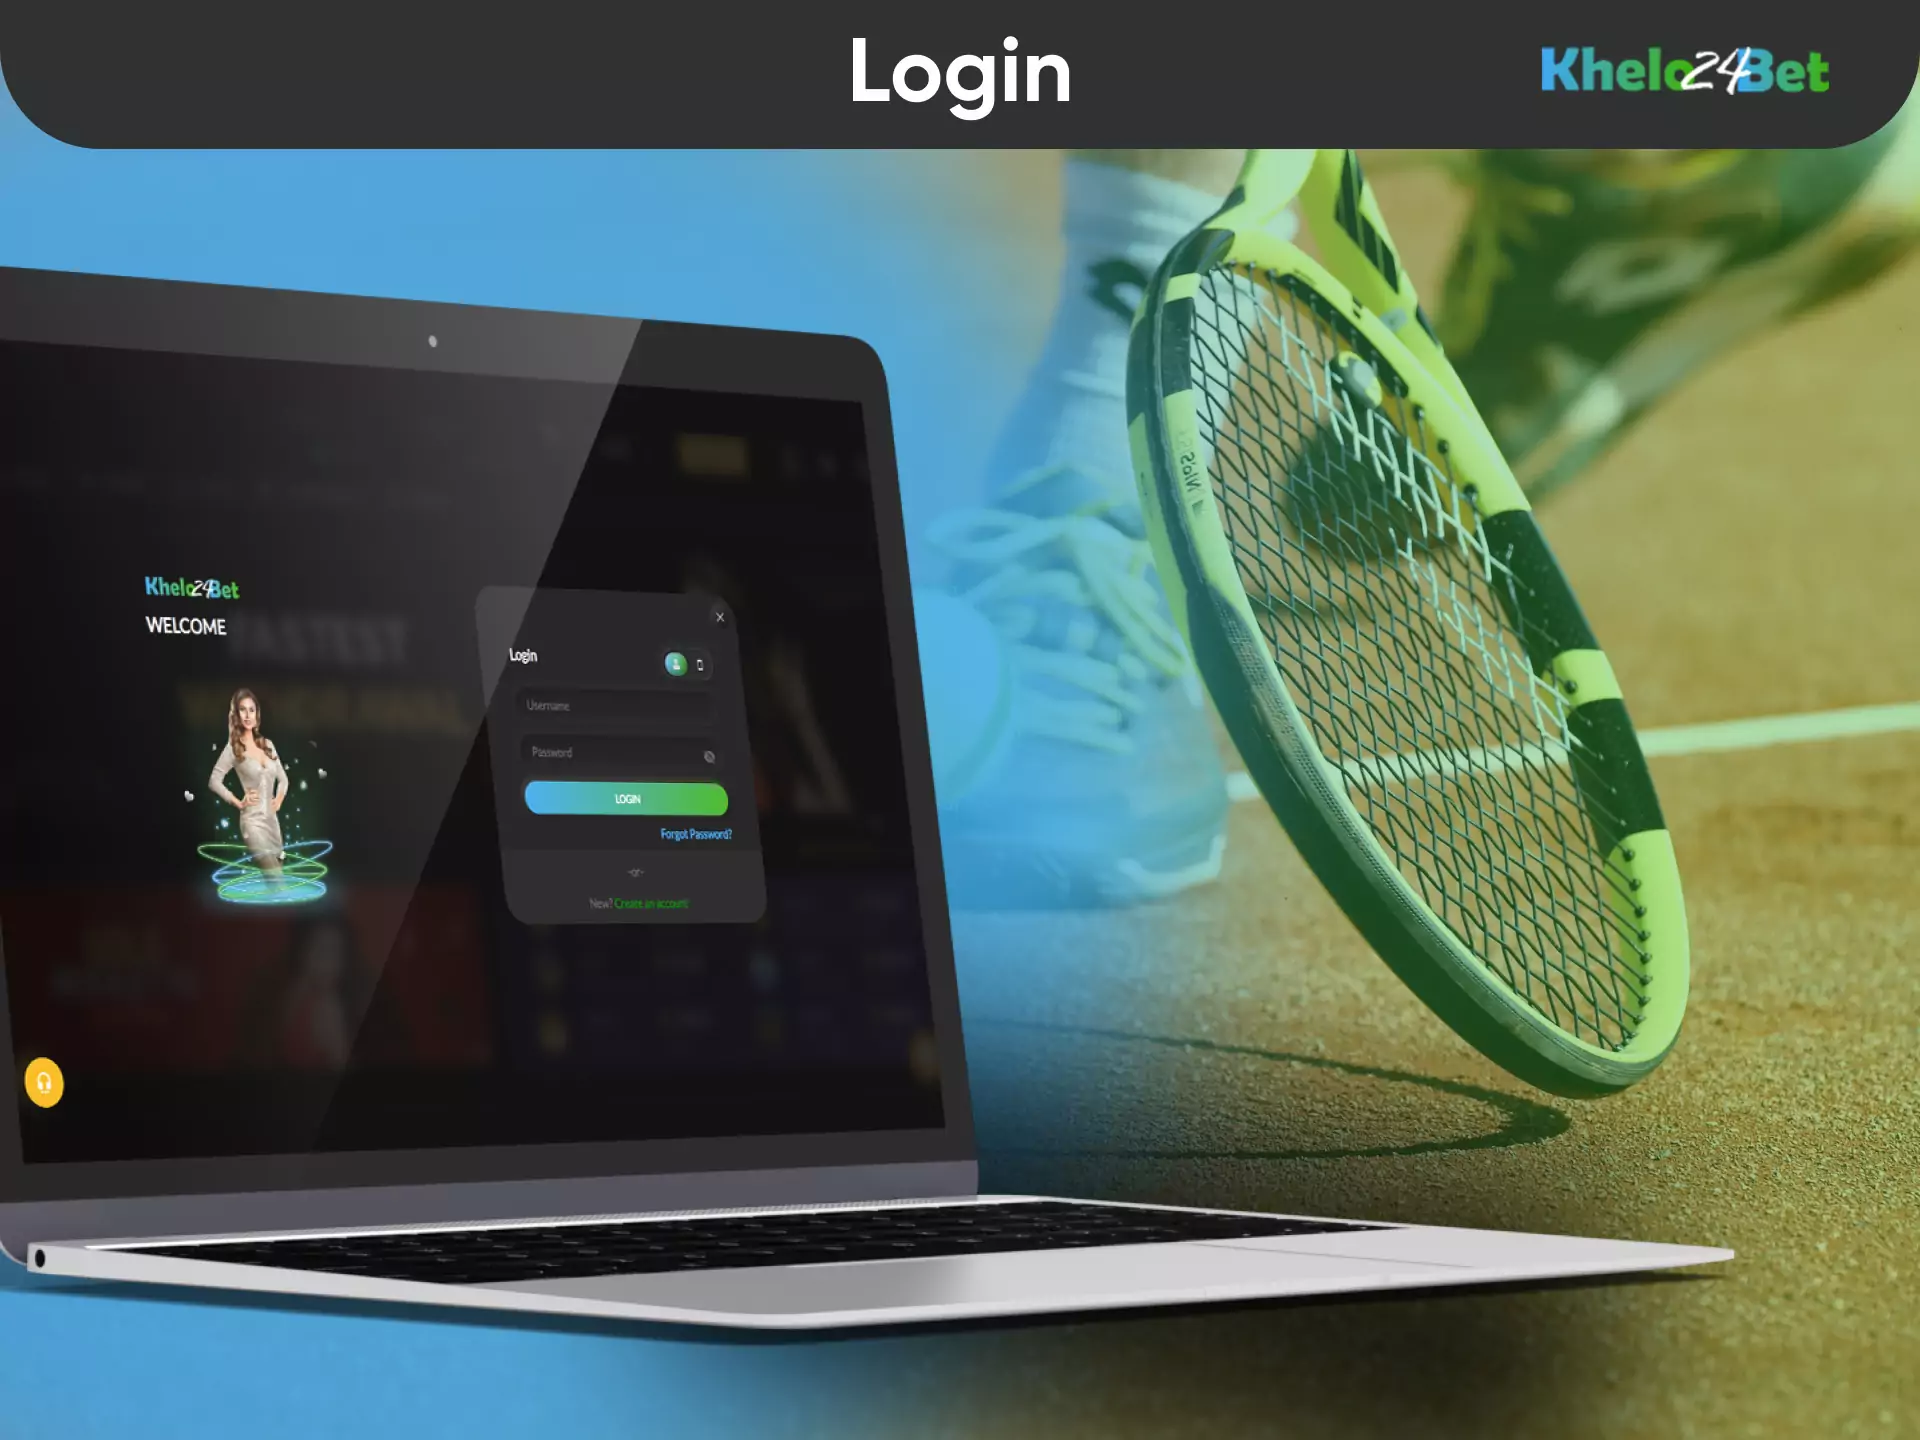 To start betting or gambling on Khelo24bet, log into your account.